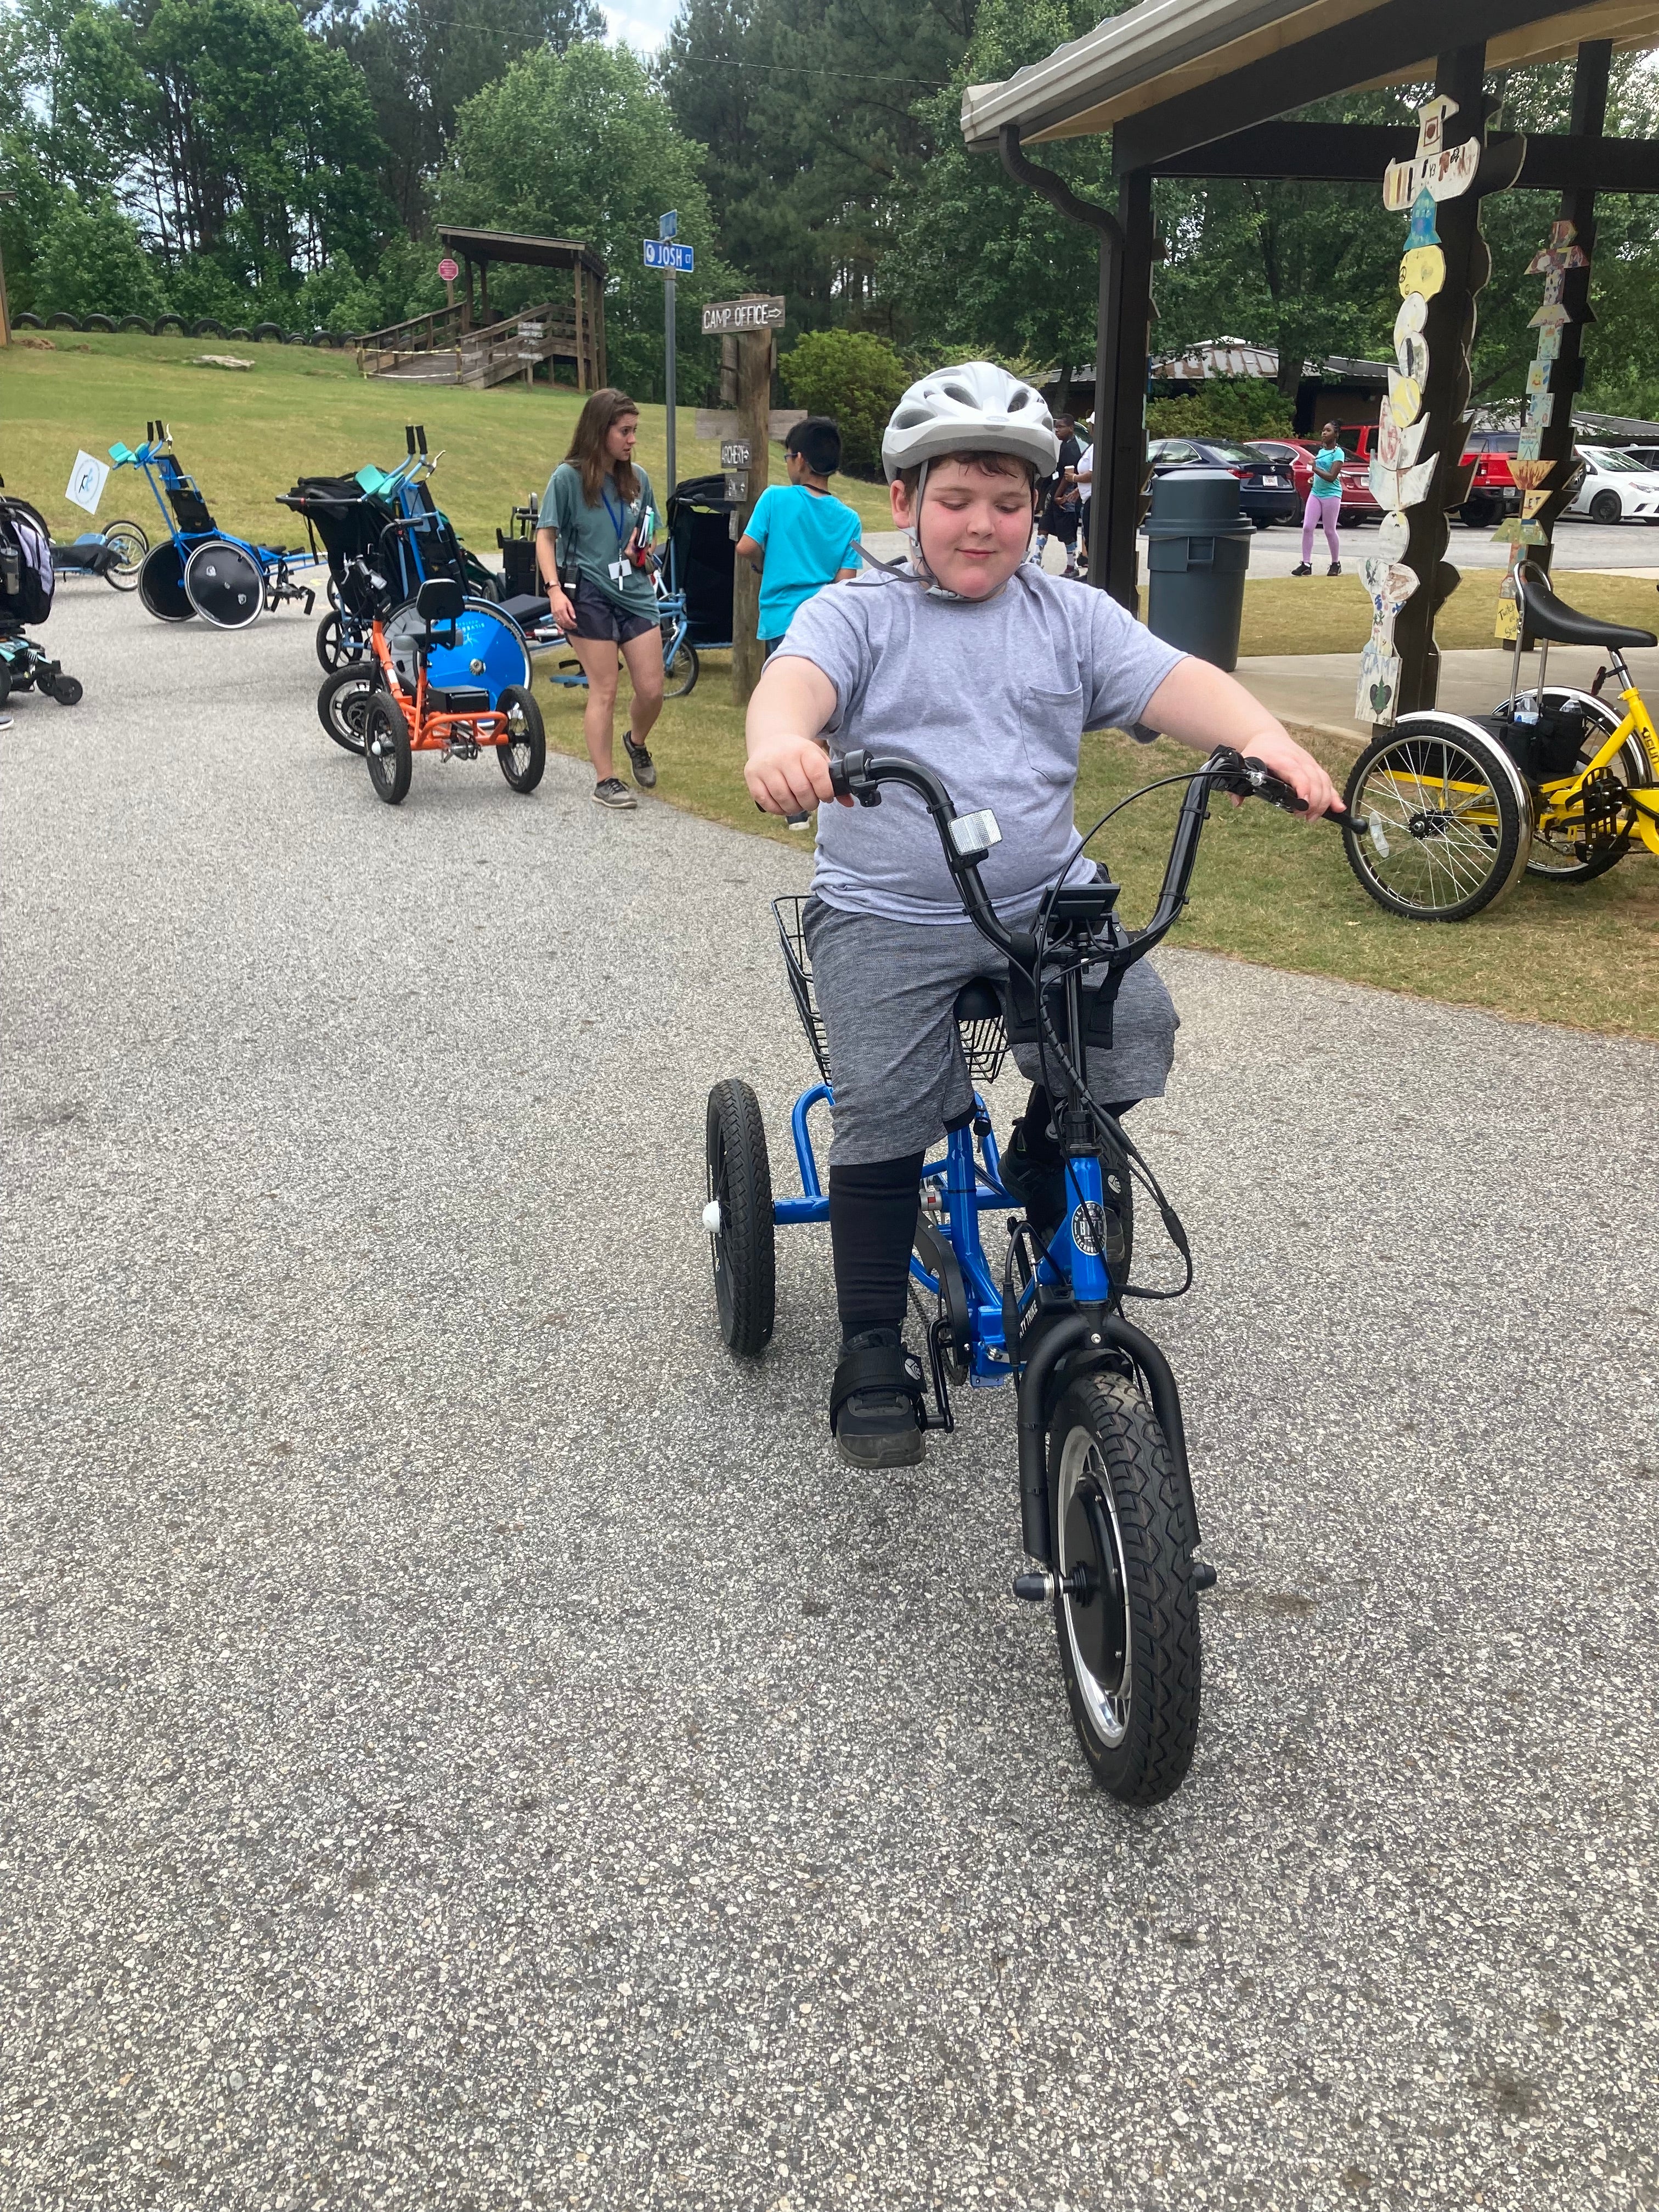 All smiles on the Liberty Trike at Camp Twin Lakes